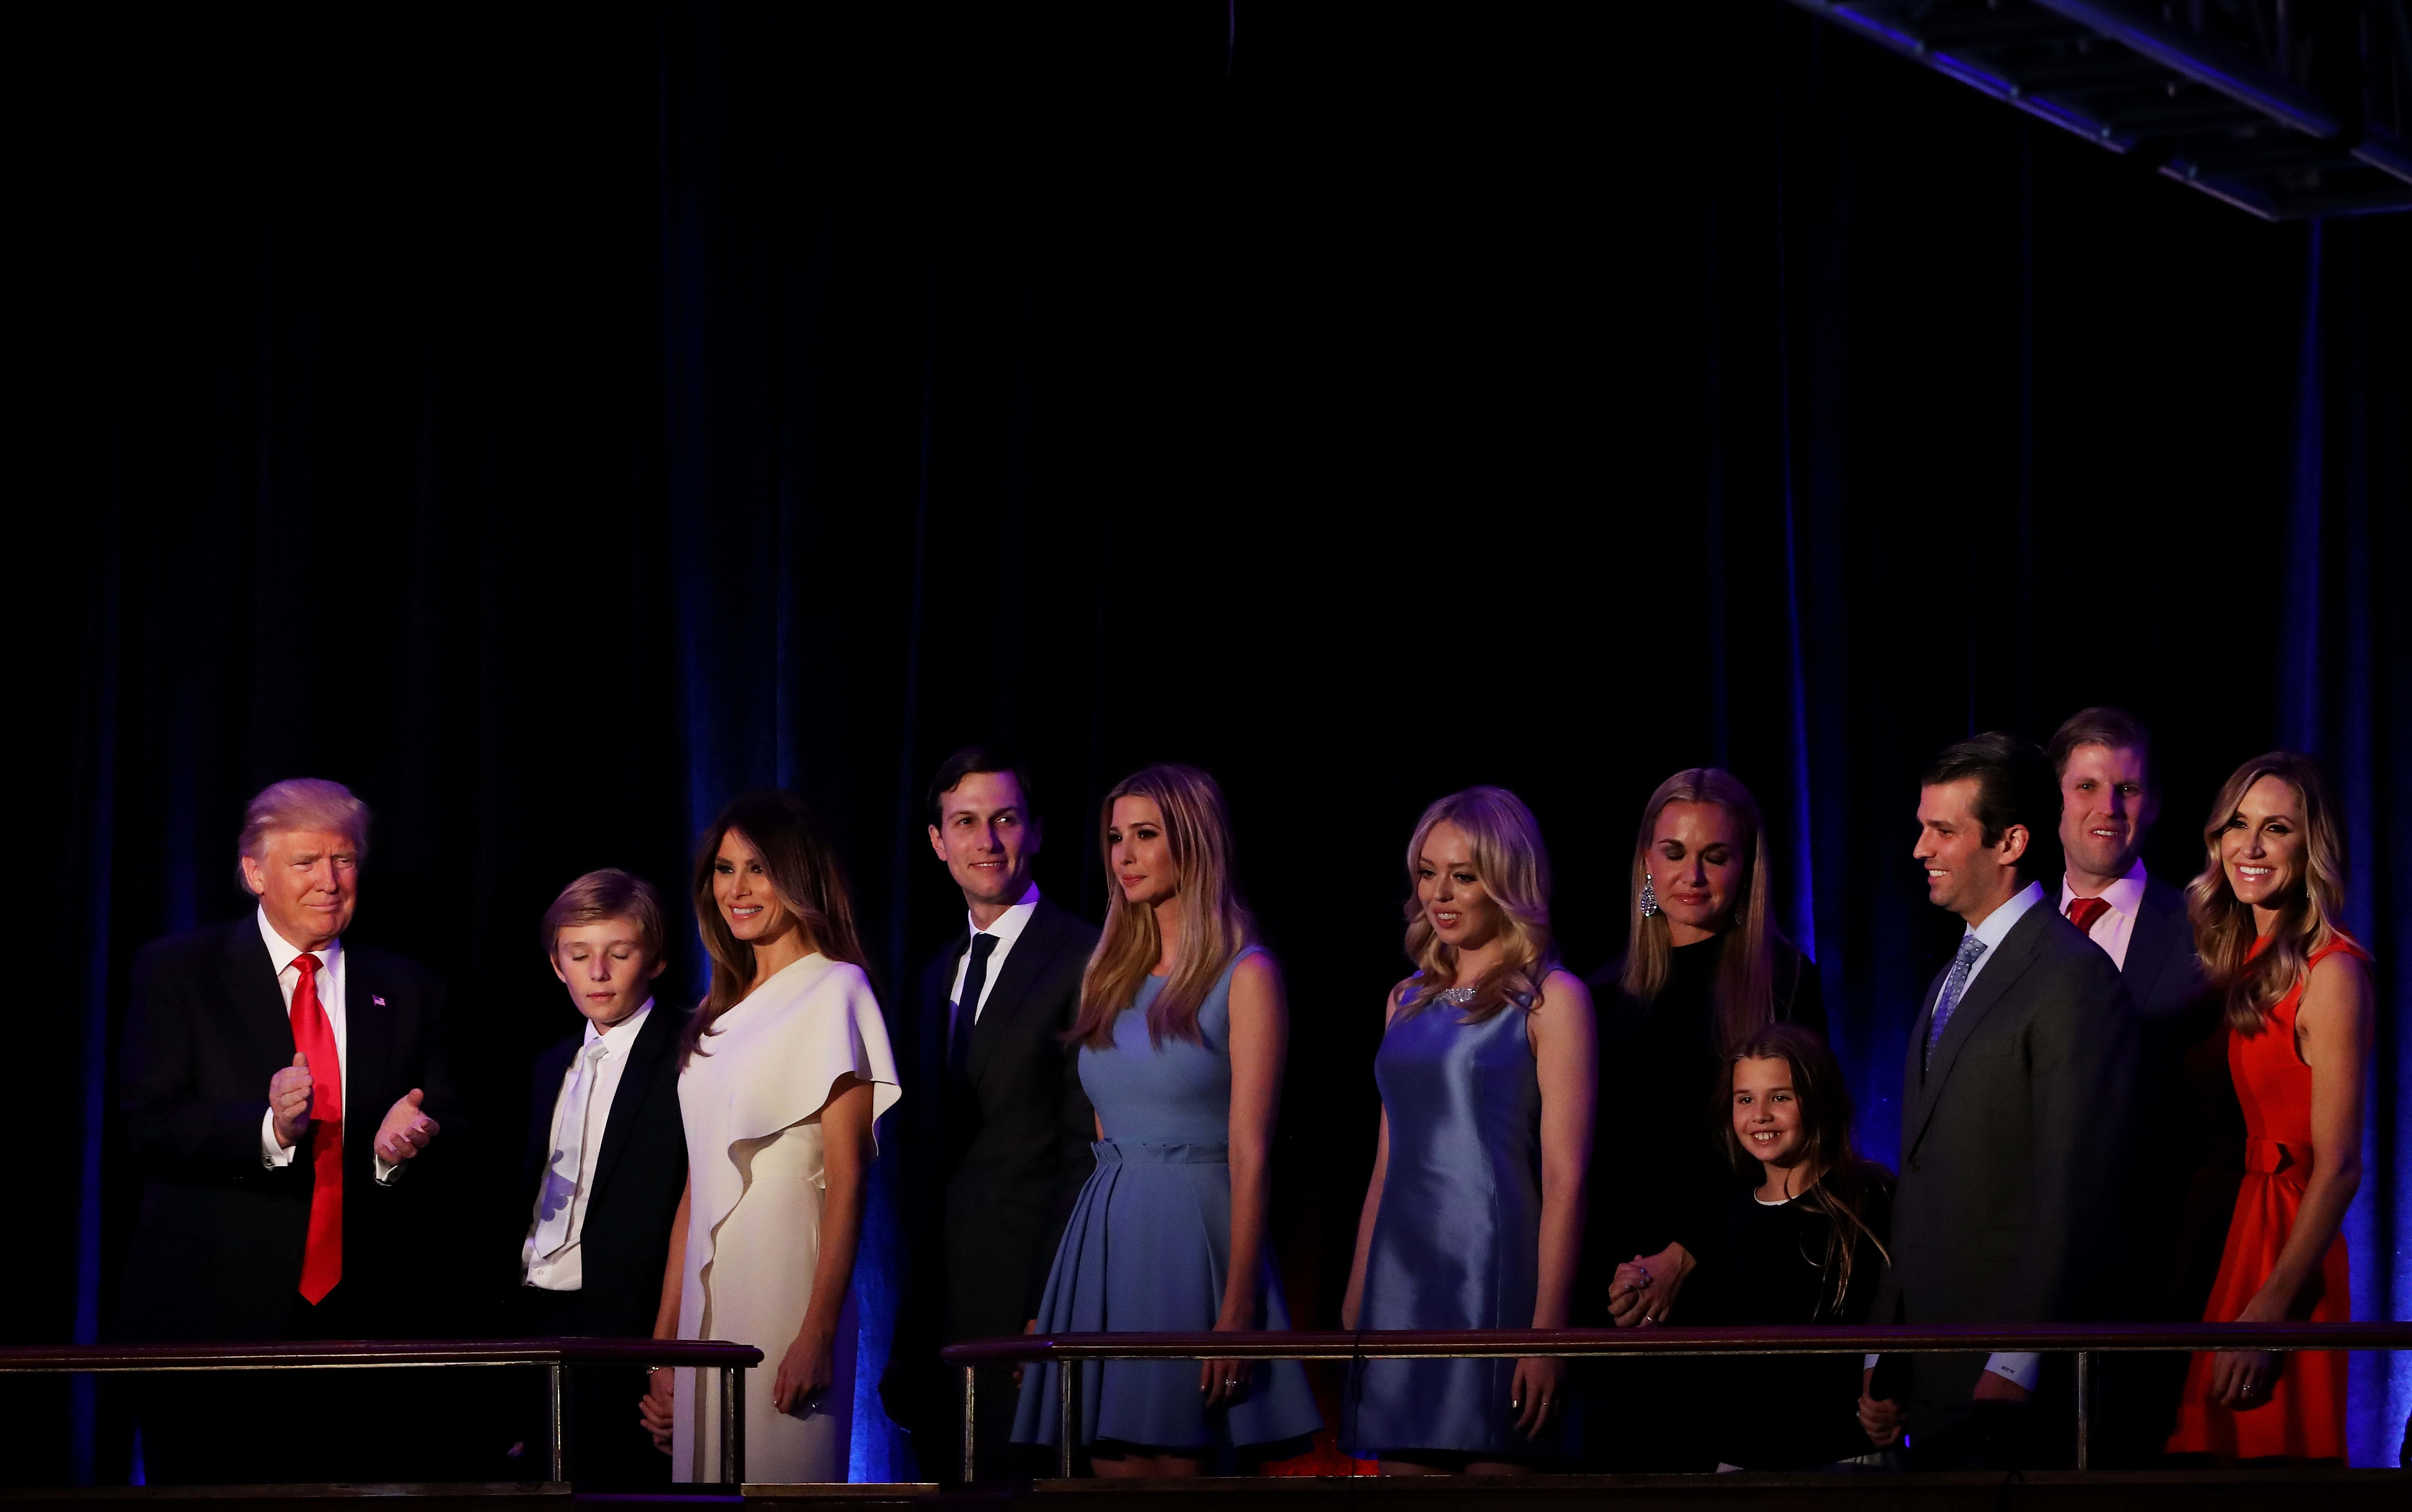 Donald Trump, supported by his family, makes his acceptance speech after winning the US presidential election.